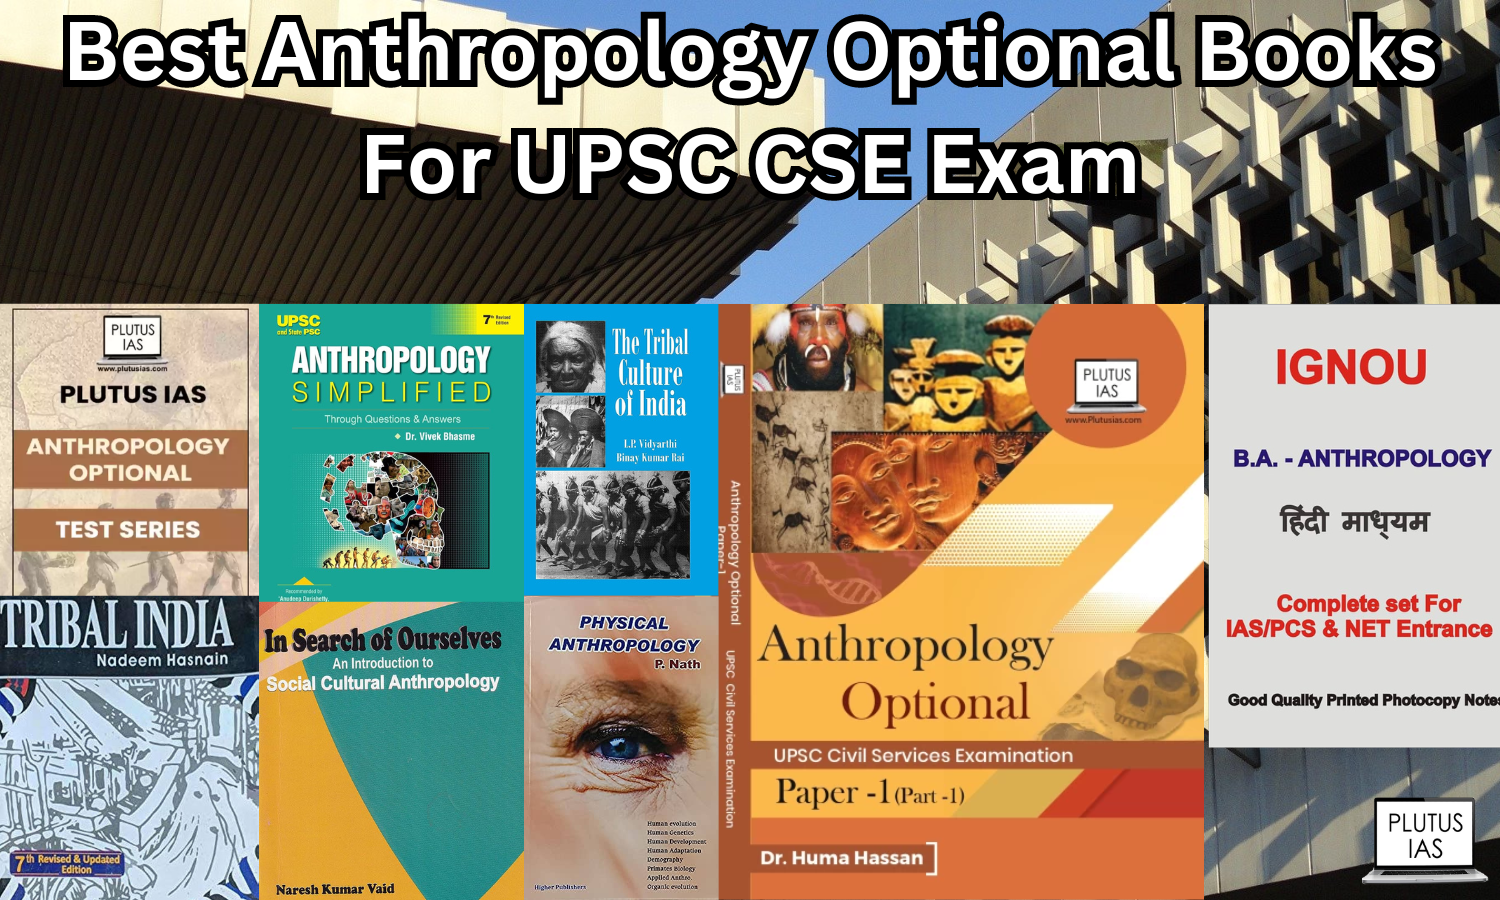 anthropology optional books anthropology in upsc anthropology book for upsc optional anthropology booklist for upsc